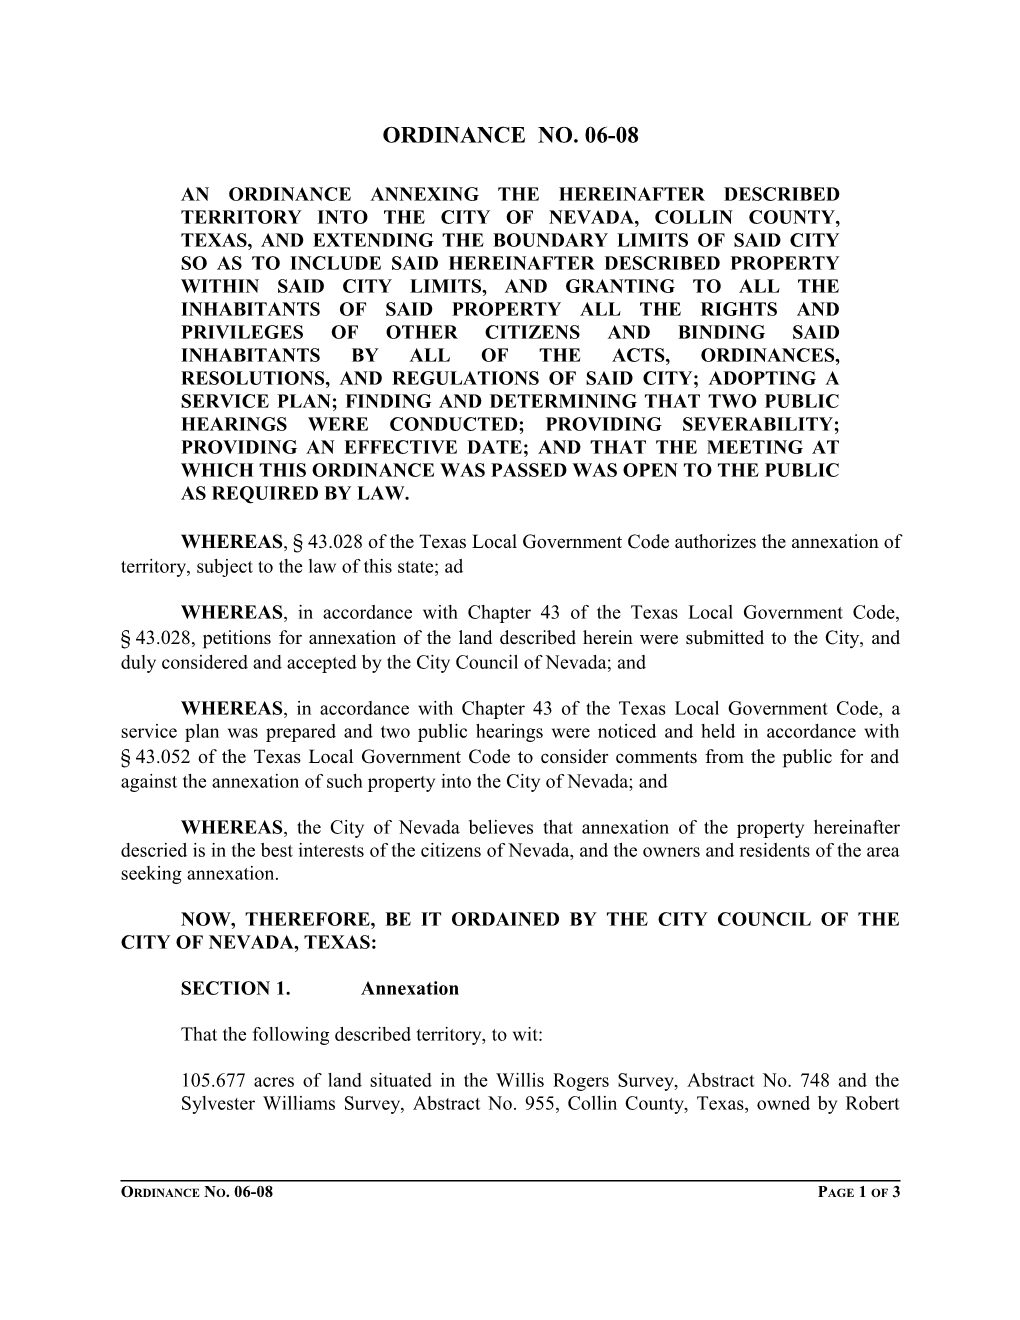 An Ordinance Annexing the Hereinafter Described Territory Into the City of Nevada, Collin